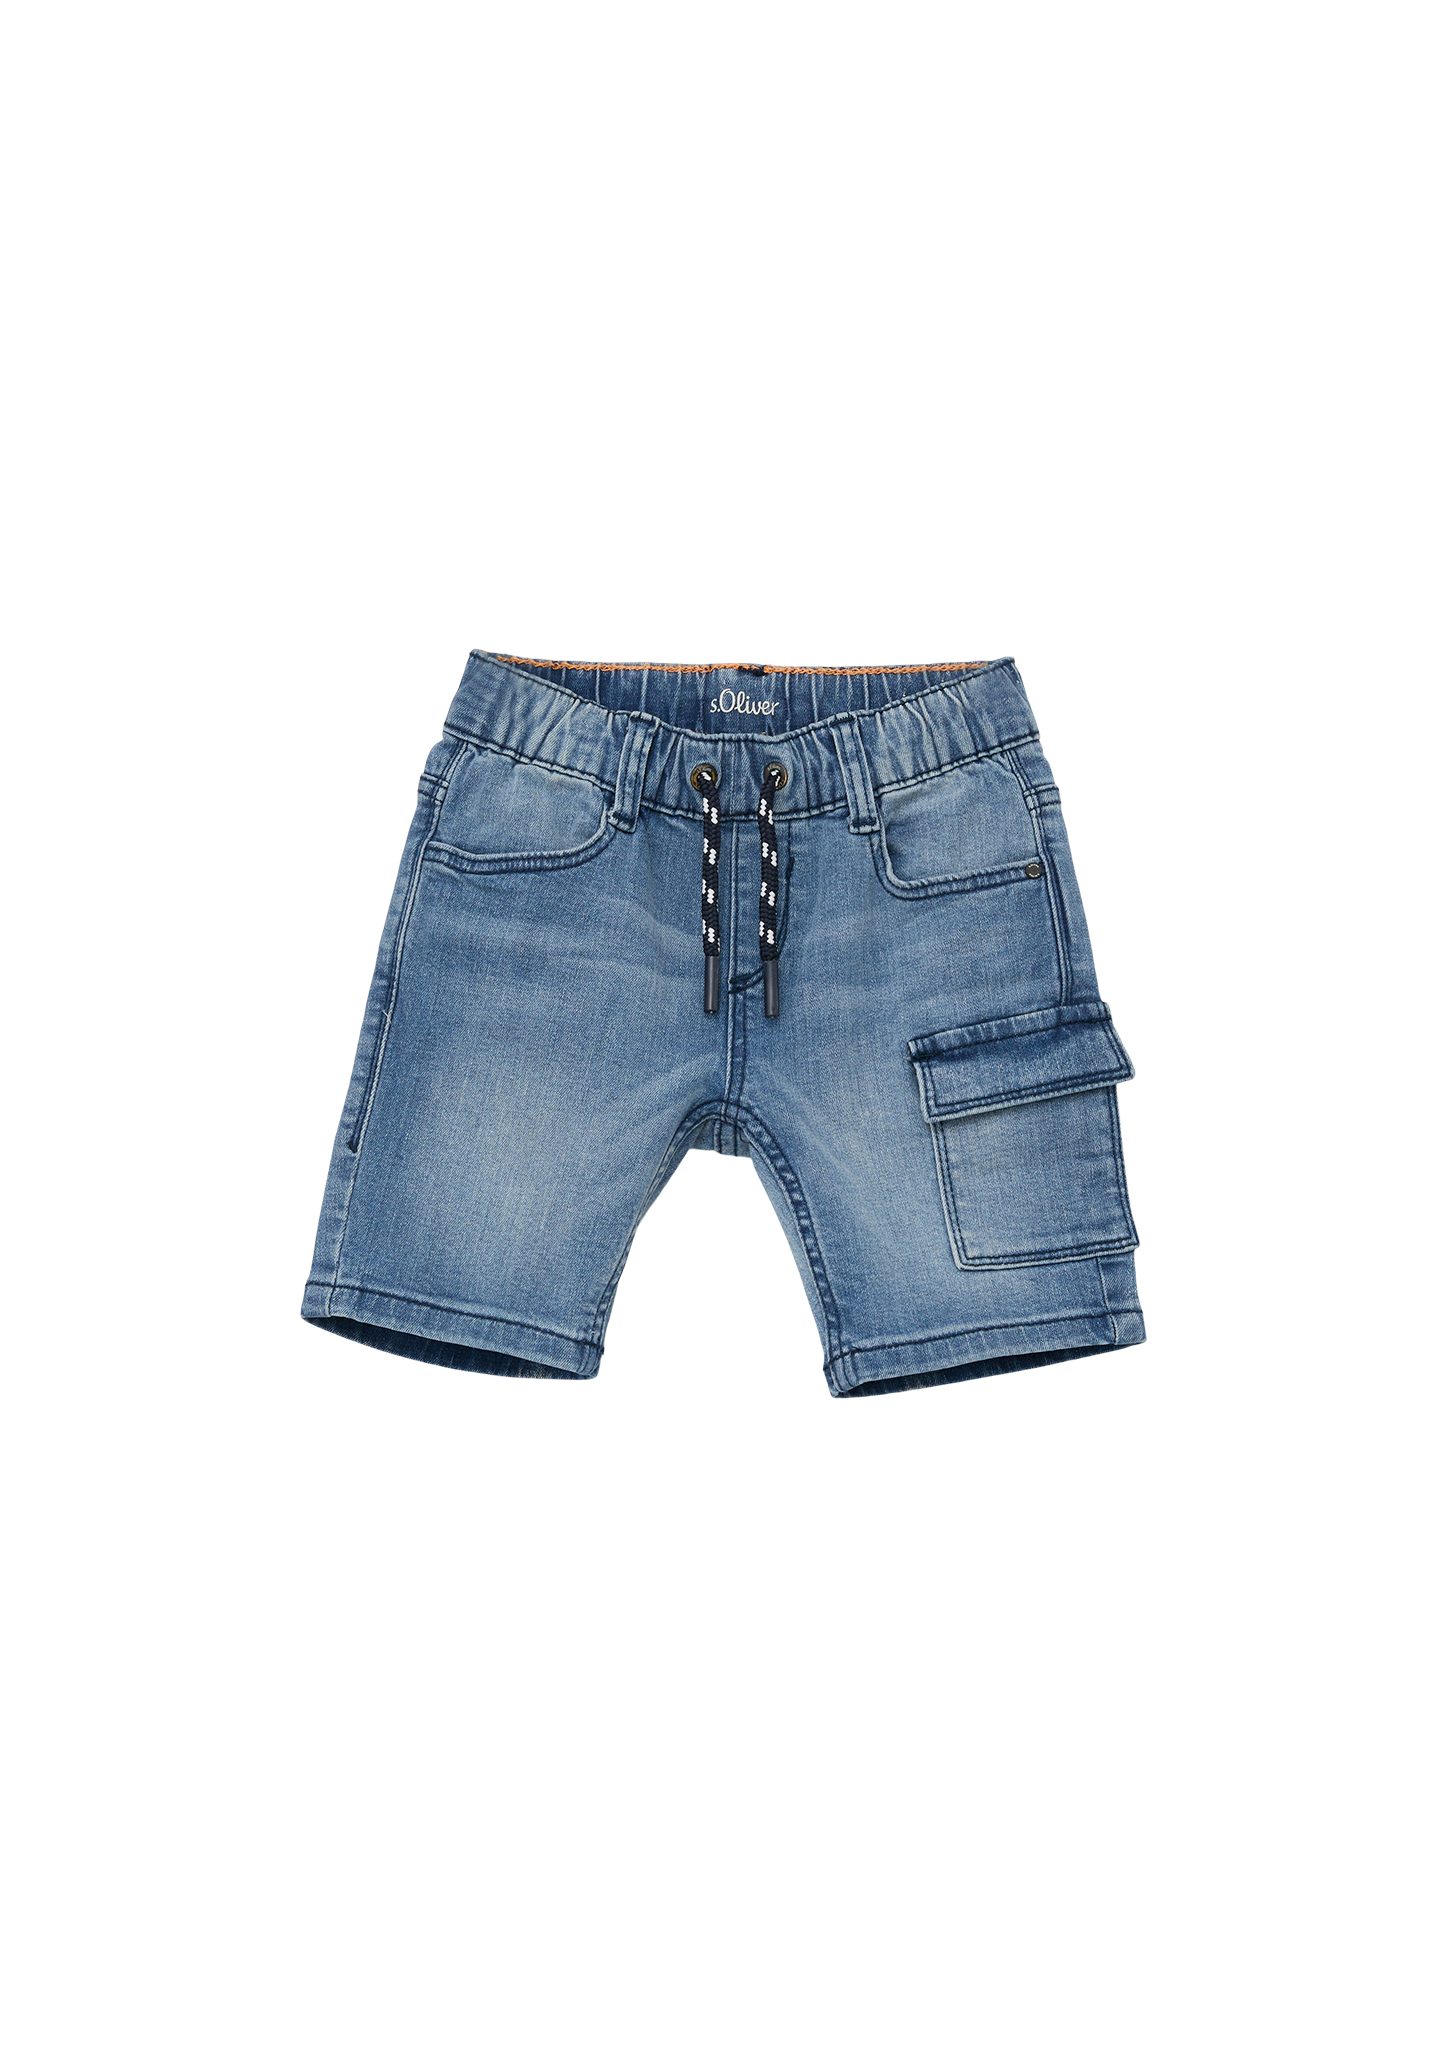 s.Oliver Jeansshorts Jeans-Bermuda Joggstyle Brad Mid Fit / Slim Slim / Tunnelzug, Waschung Leg / angedeuteter Rise